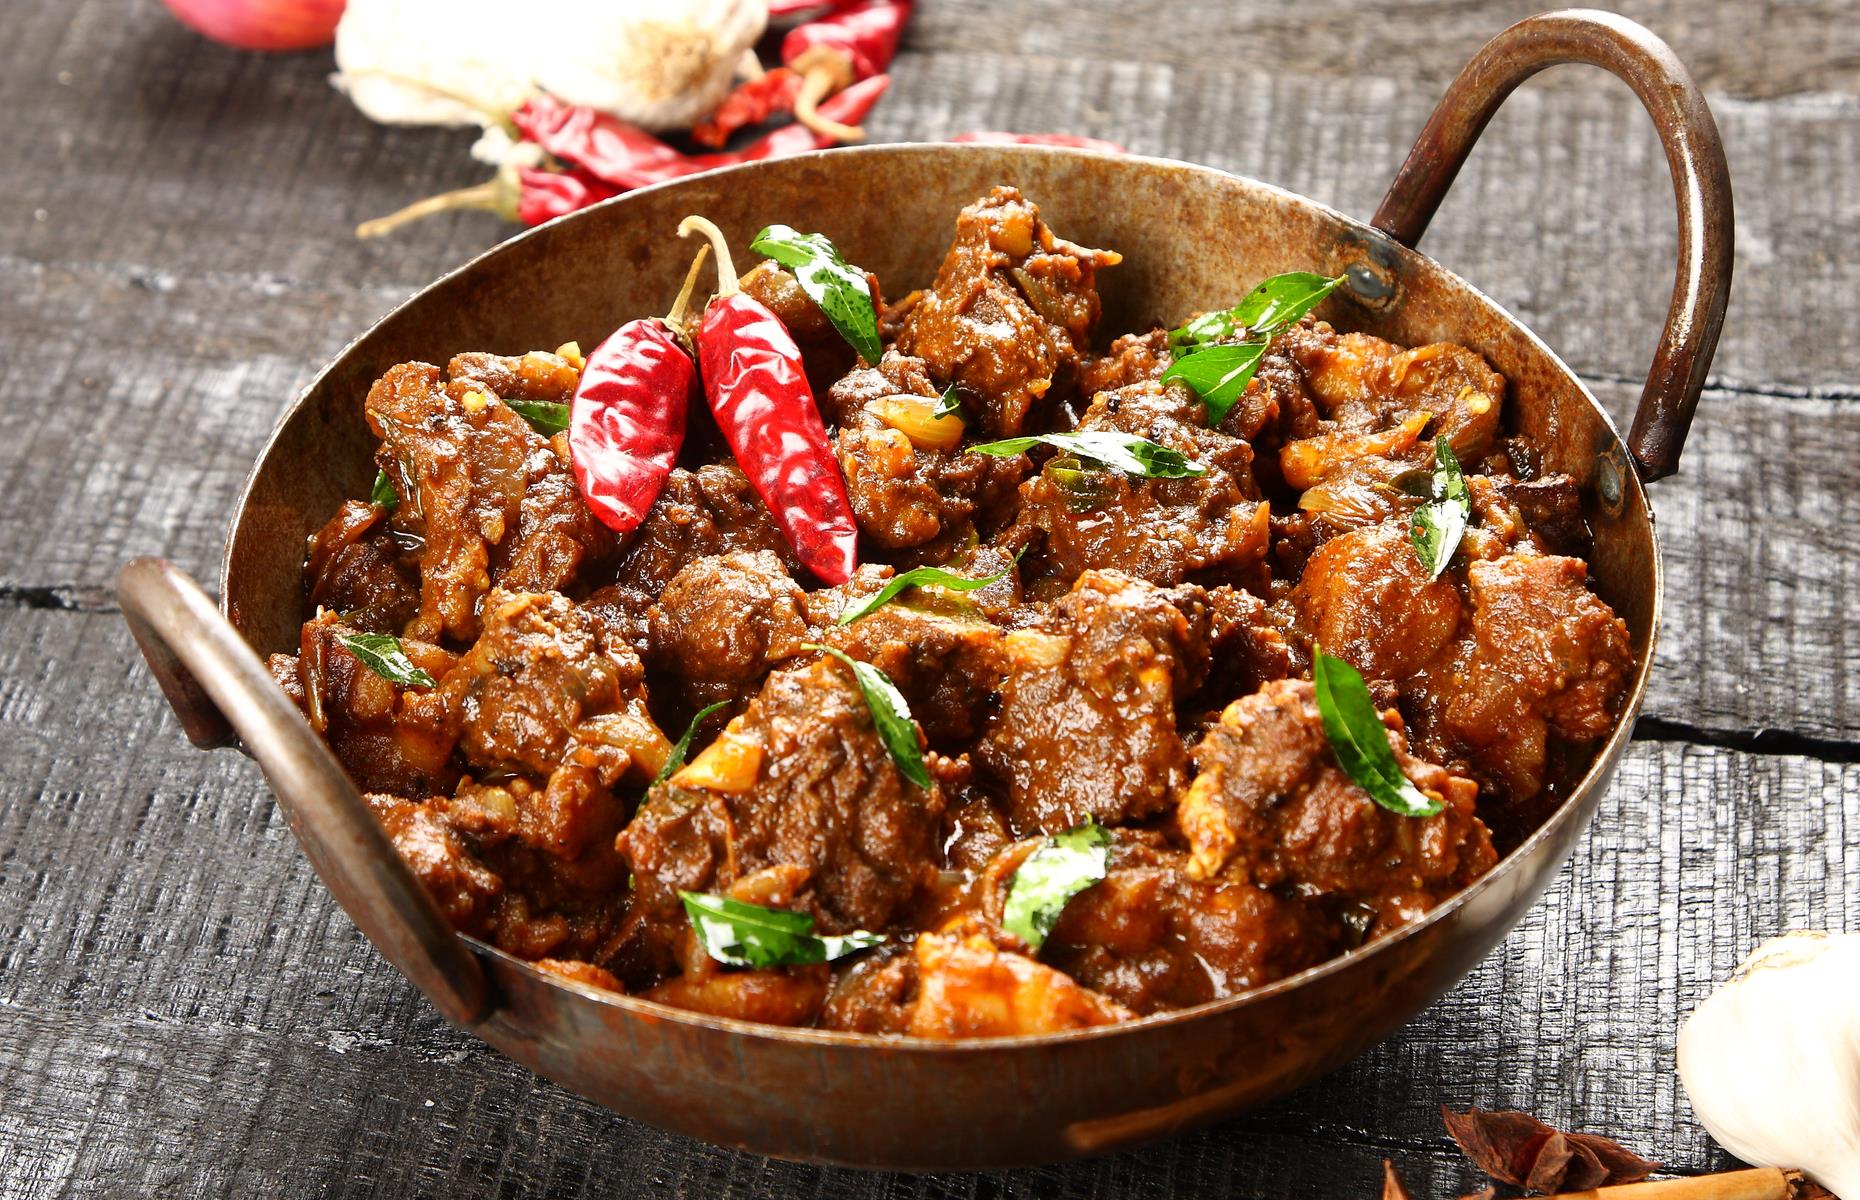 <p>You may think a rich, spicy and tender lamb curry with neck fillet would take an age to cook. Not in this recipe, where it's made in a pressure cooker in just 20 minutes. Pressure cookers are great for making stewed dishes in an instant, so if you have one, give it a go.</p>  <p><a href="https://www.lovefood.com/recipes/59901/lamb-browned-in-its-sauce-recipe"><strong>Get the recipe for lamb and tomato curry here</strong></a></p>